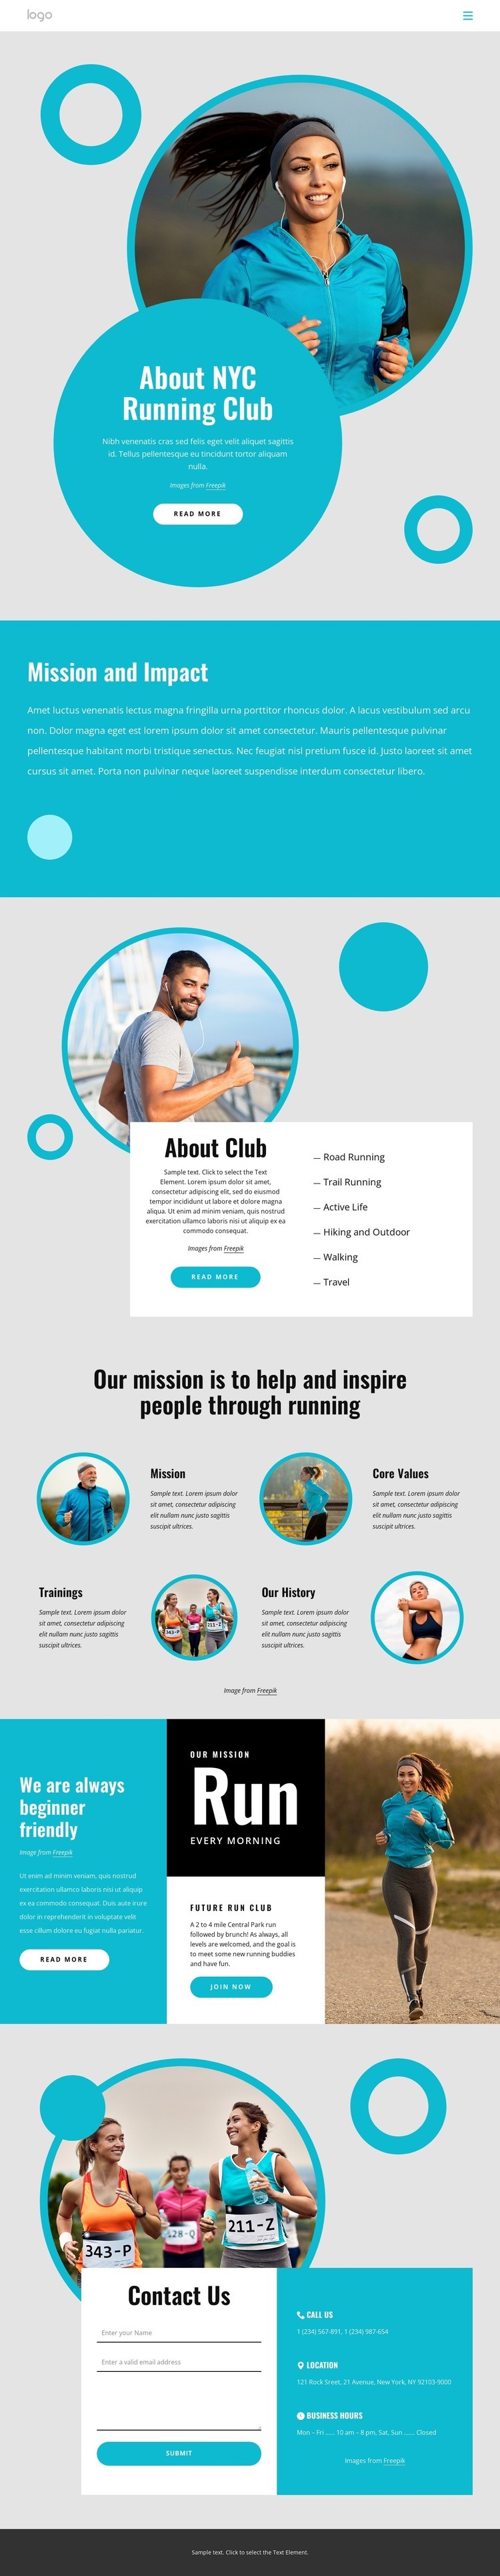 About NYC running club Squarespace Template Alternative